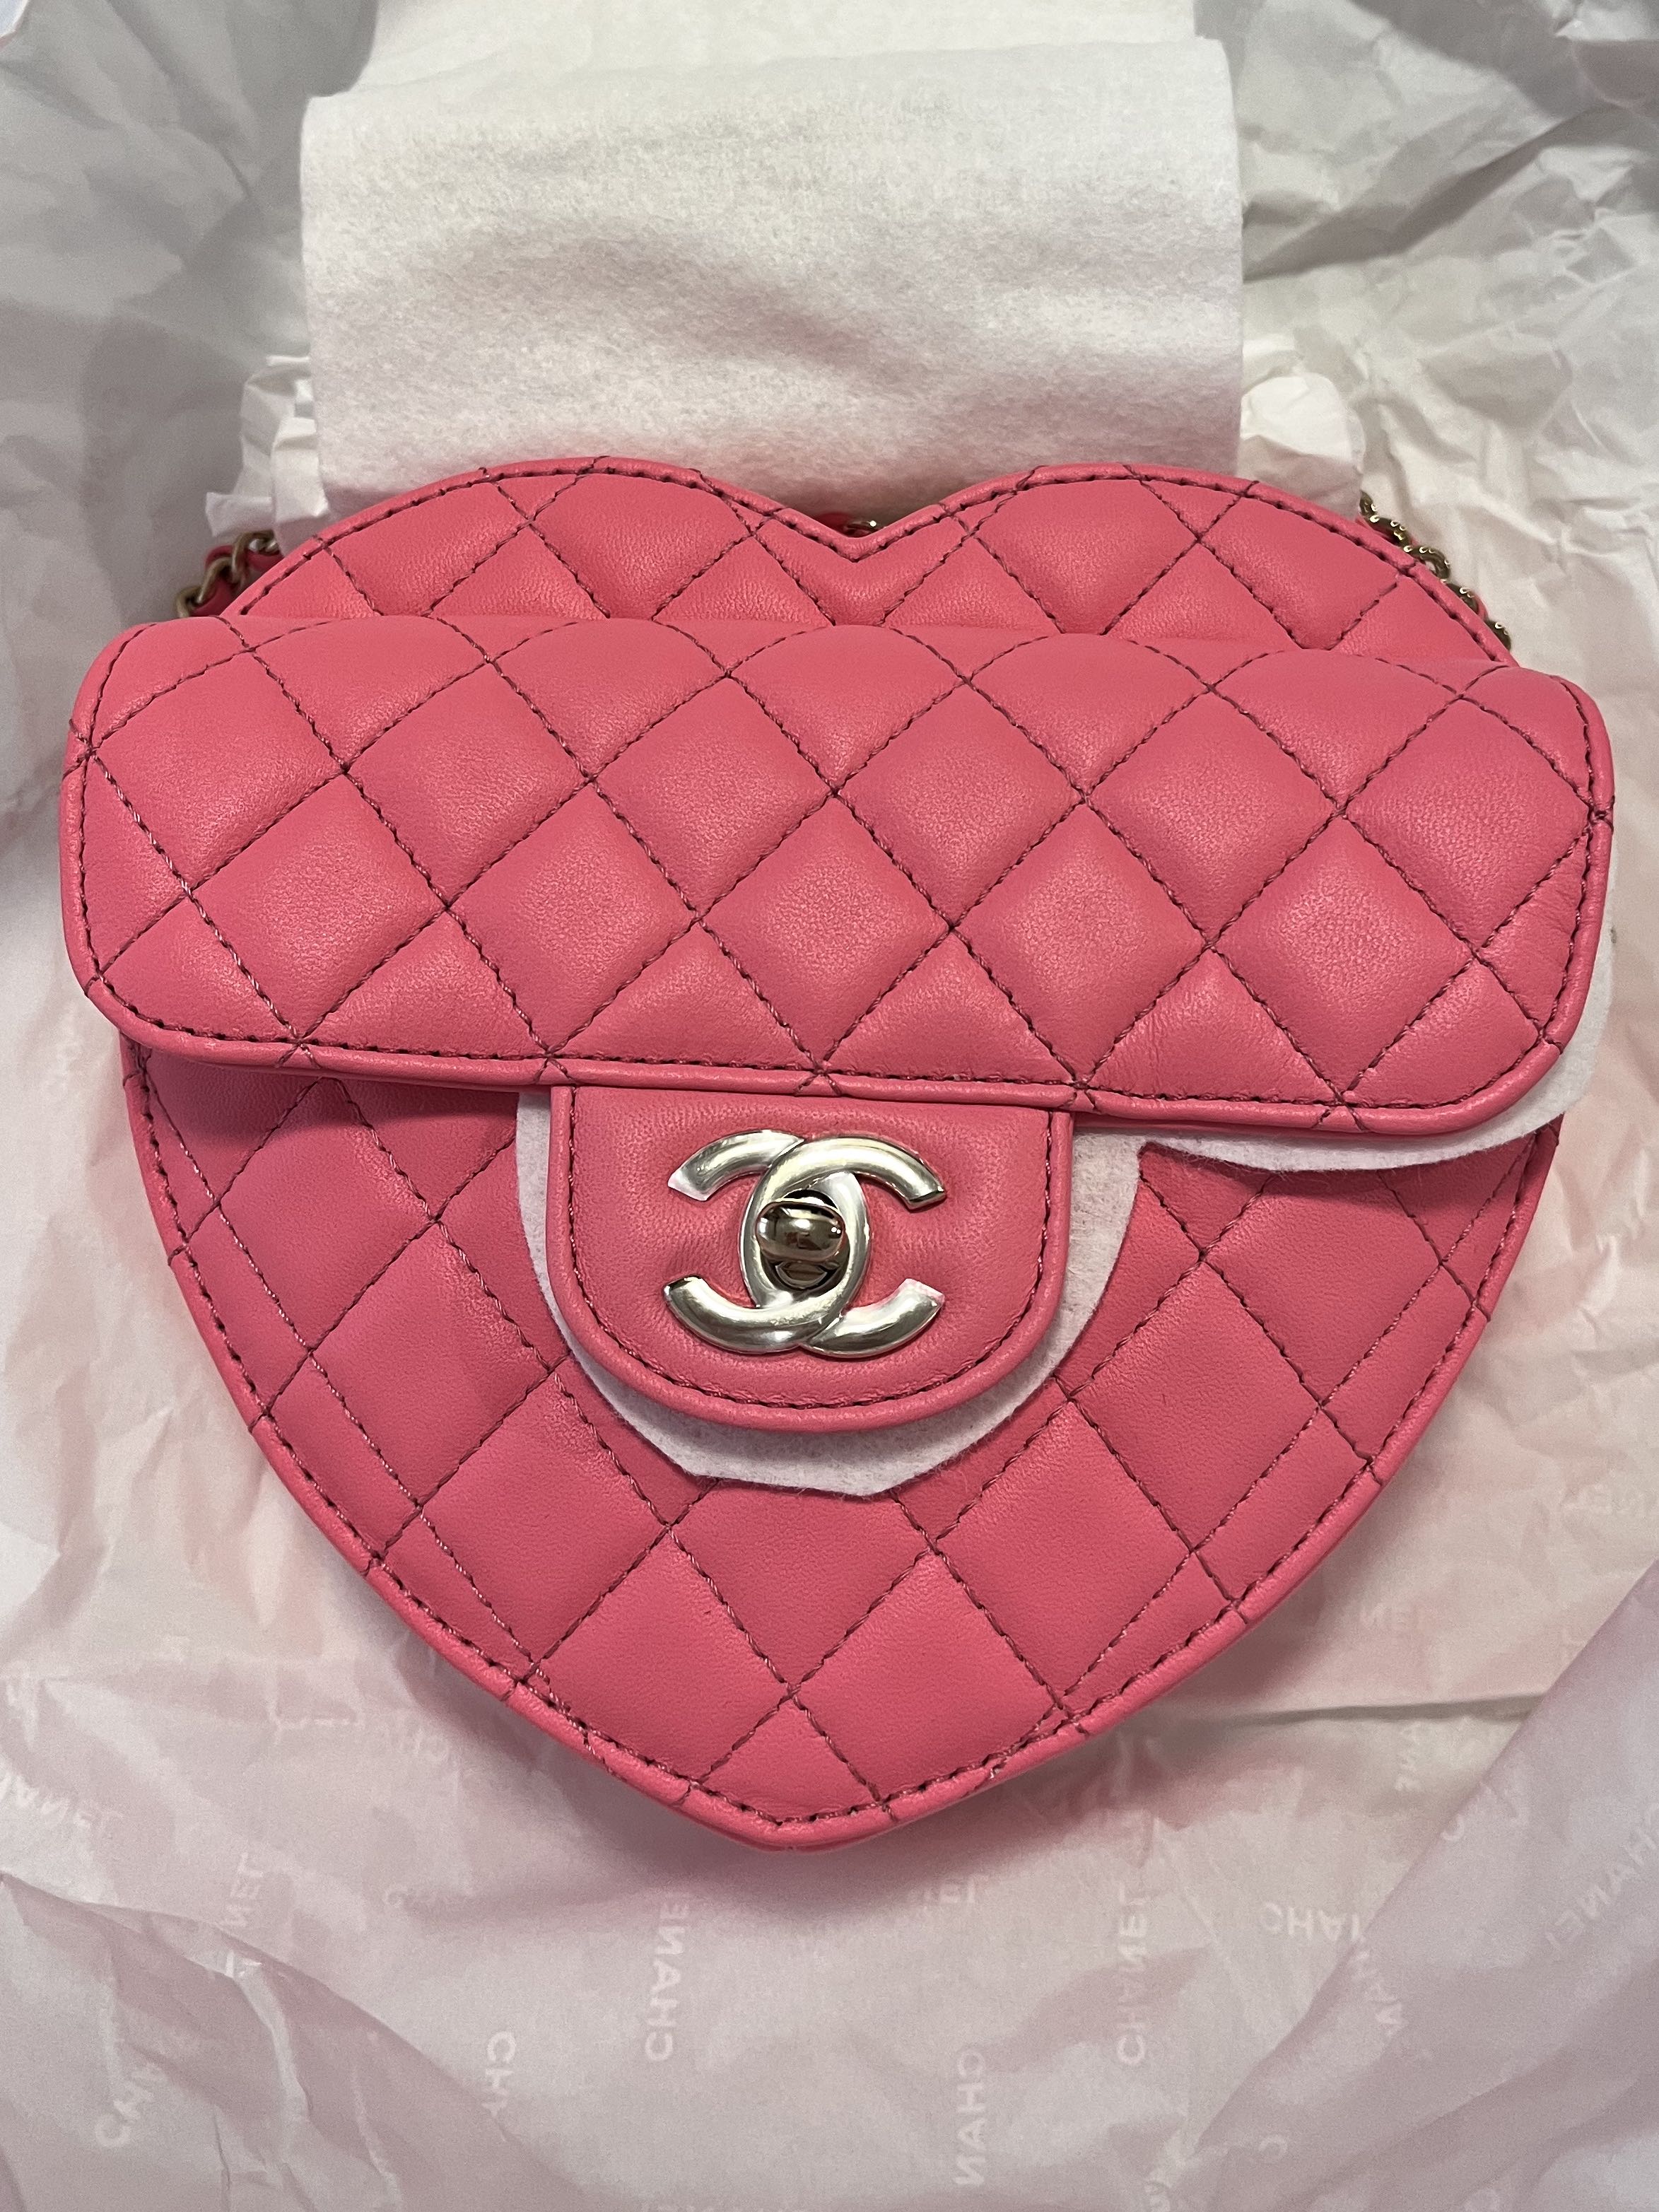 CHANEL Heart Bag (AS3191 B07958 NH621) in 2023